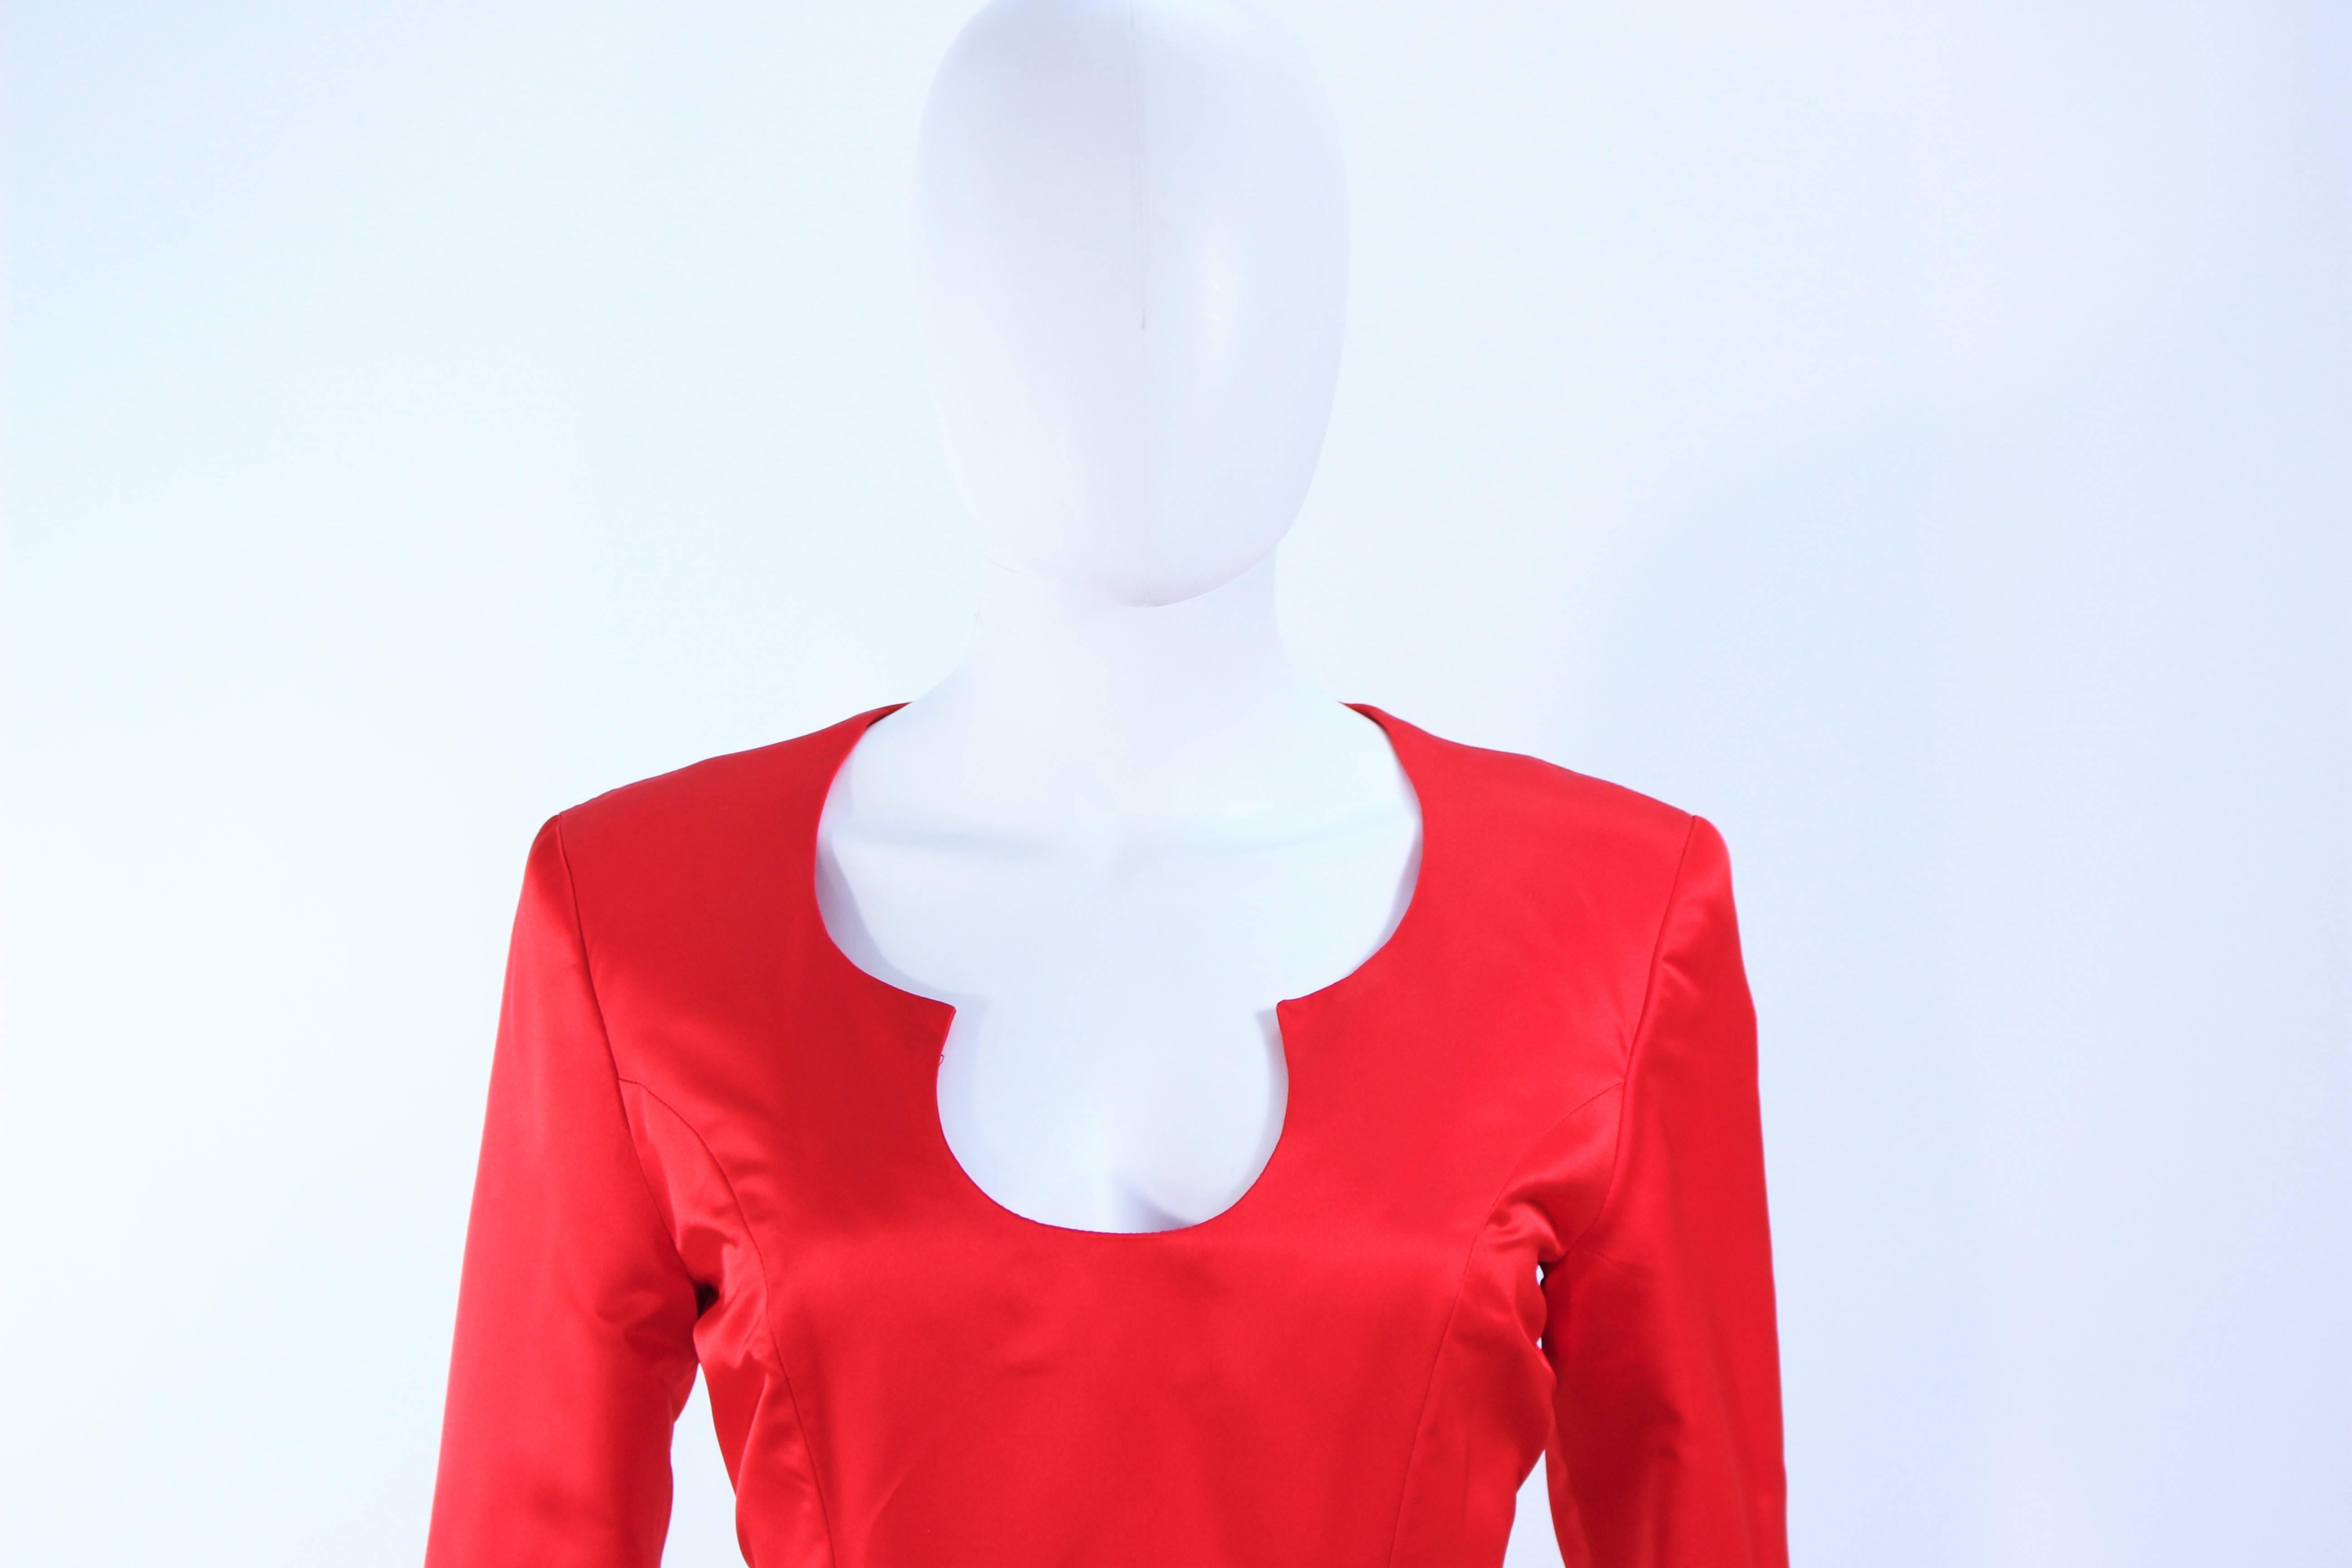 Women's TED HEYMAN Red Silk Cocktail Dress with Lace Trim Size 8 For Sale